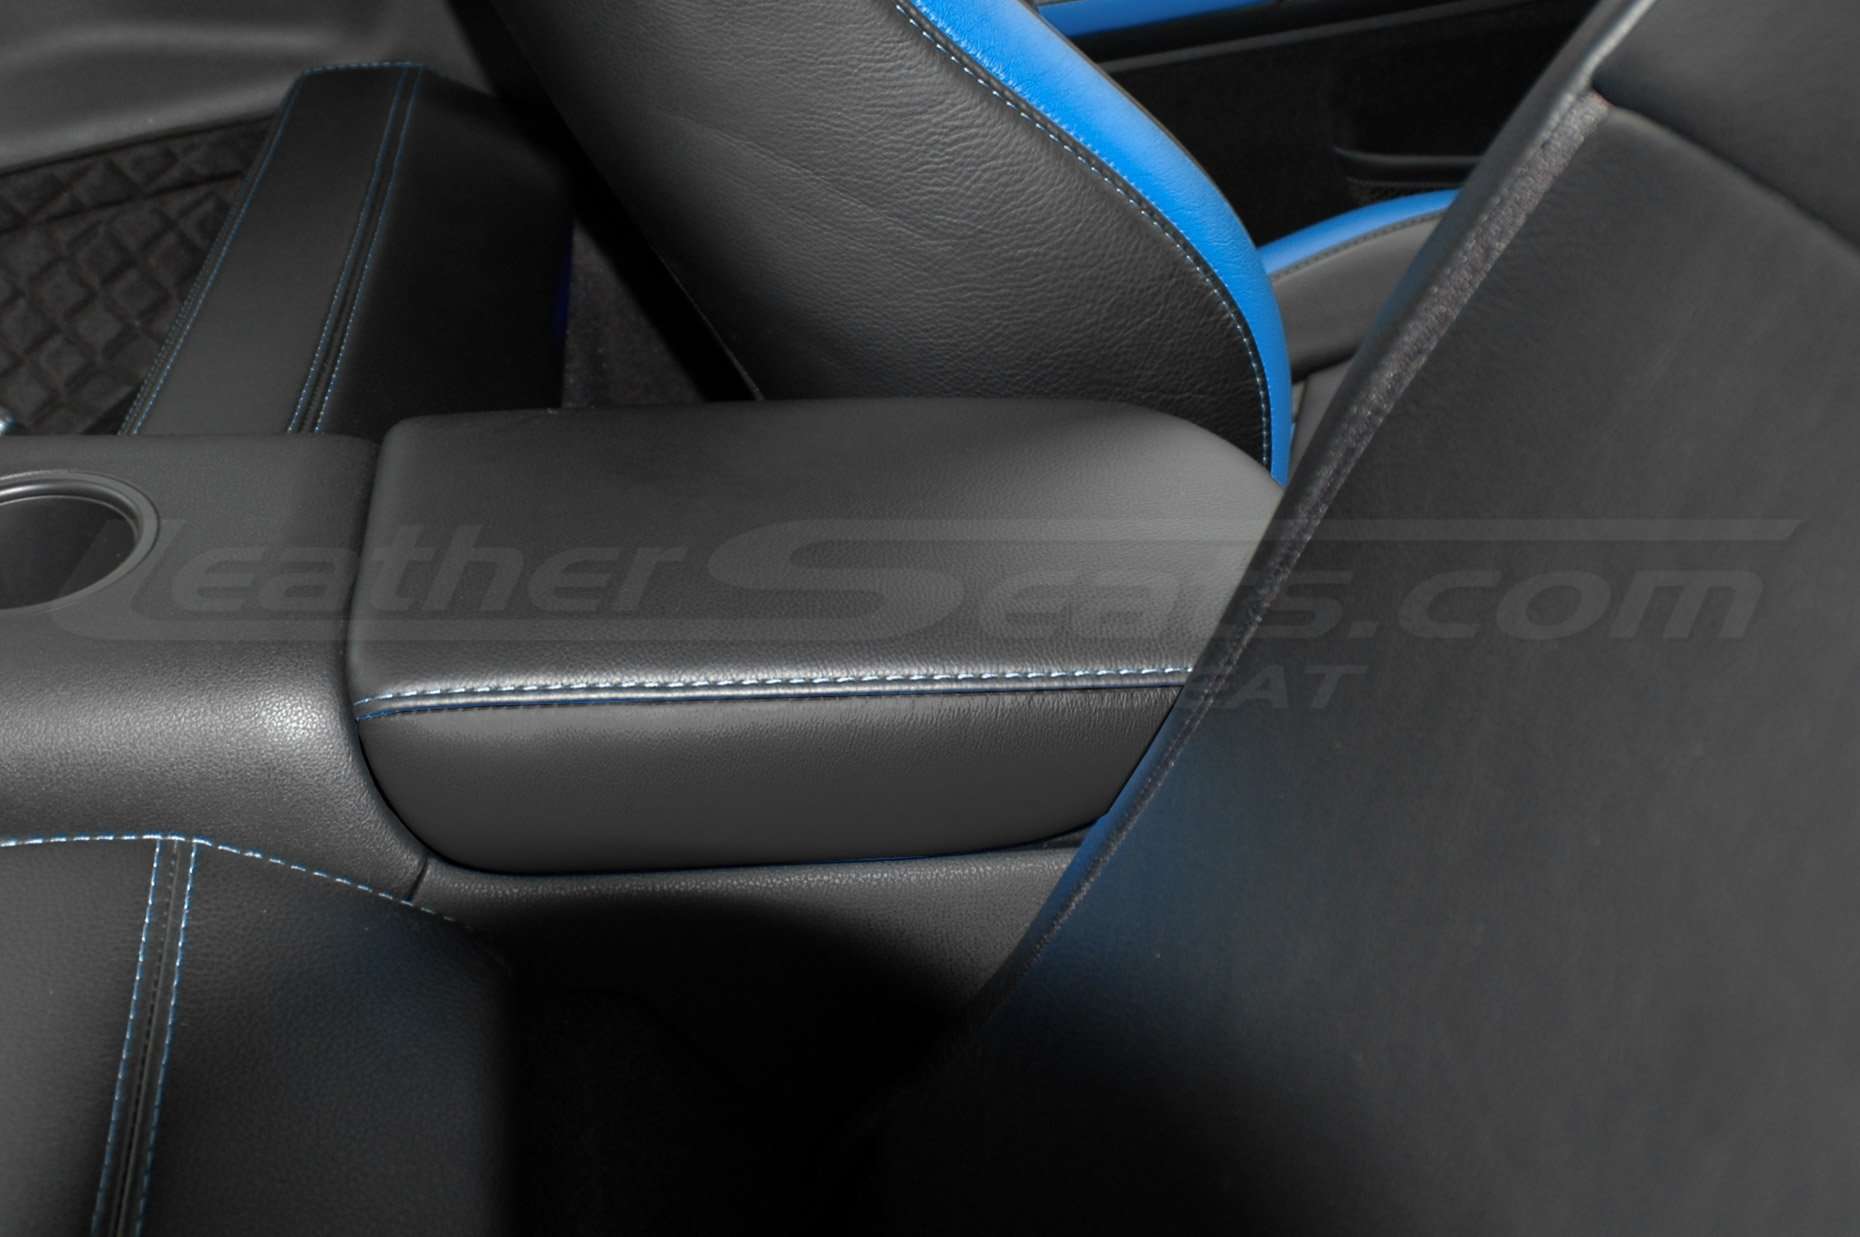 Nissan GT-R leather console lid cover in Black with Cobalt stitching